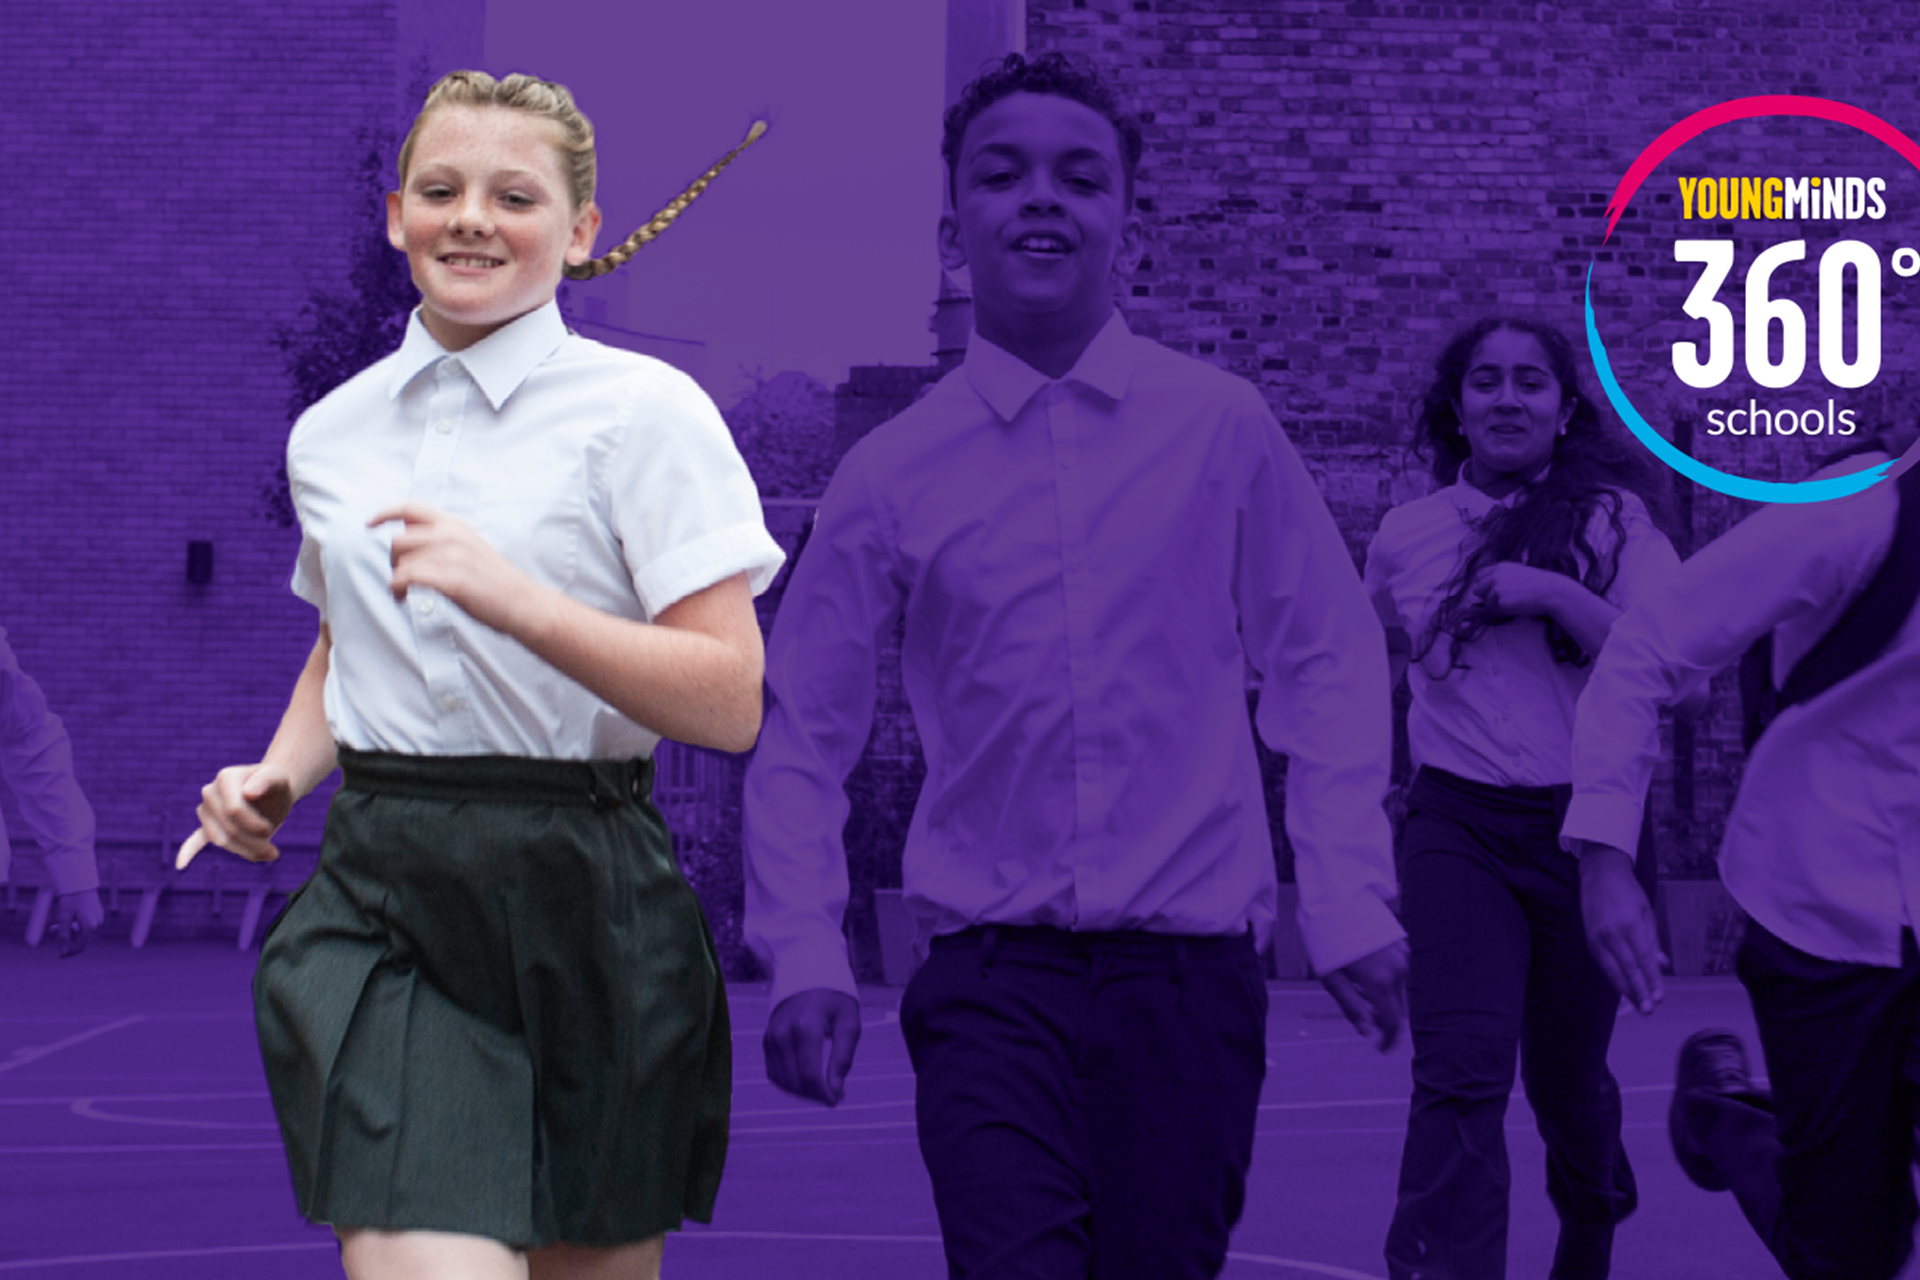 A group of five students in school uniform run towards the camera. The background and four of the students have a purple fade over them with one student highlighted in colour. Our 360 schools logo is on the top right hand side.